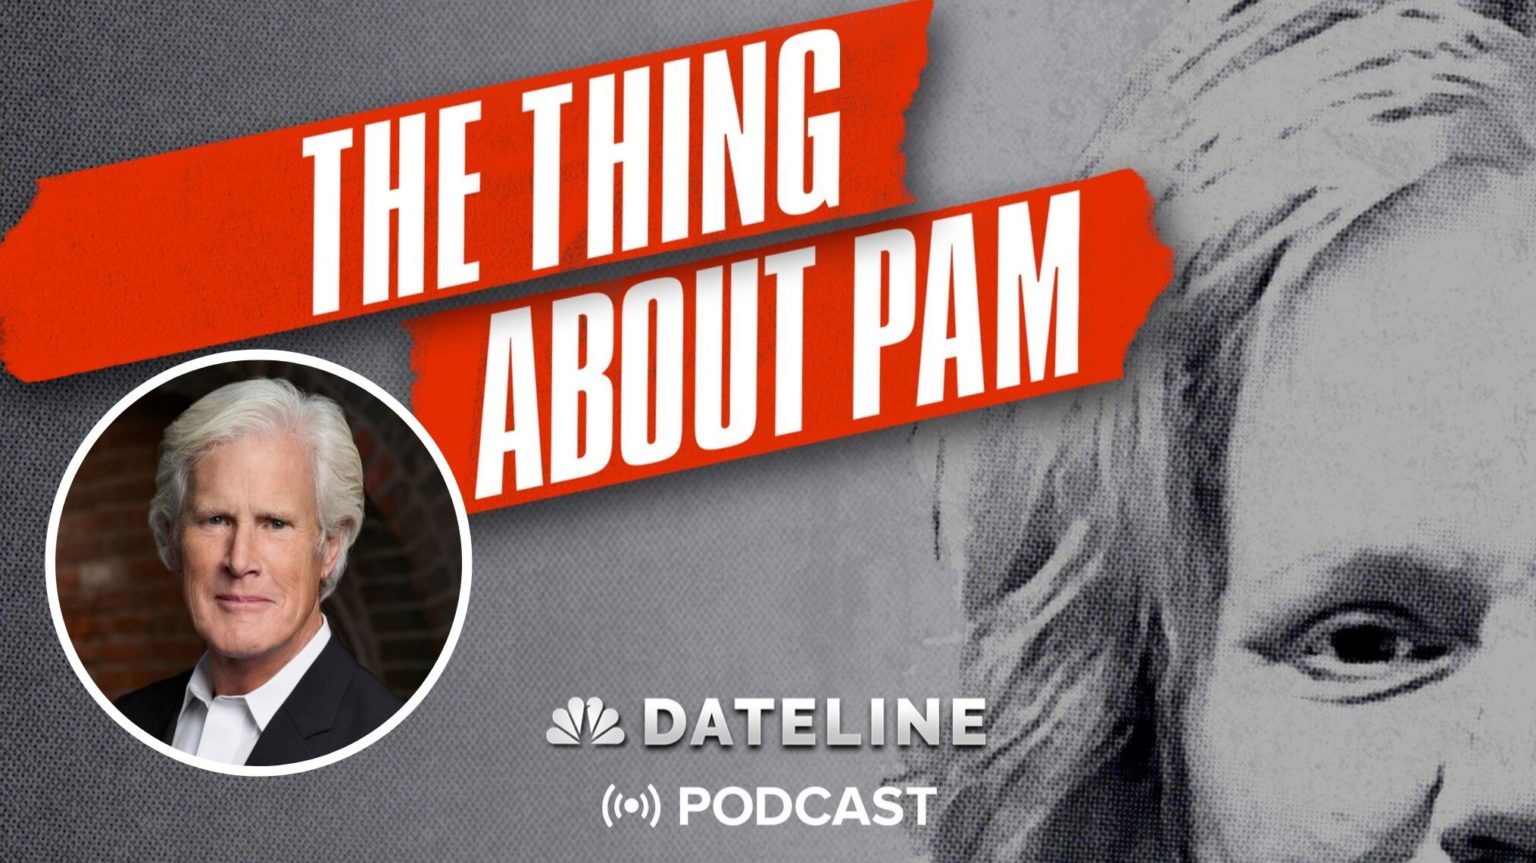 If you're a fan of 'Dateline', you know the story of Pam Hupp. But as interesting as the case is, why does 'Dateline' NBC continue to cover the story?